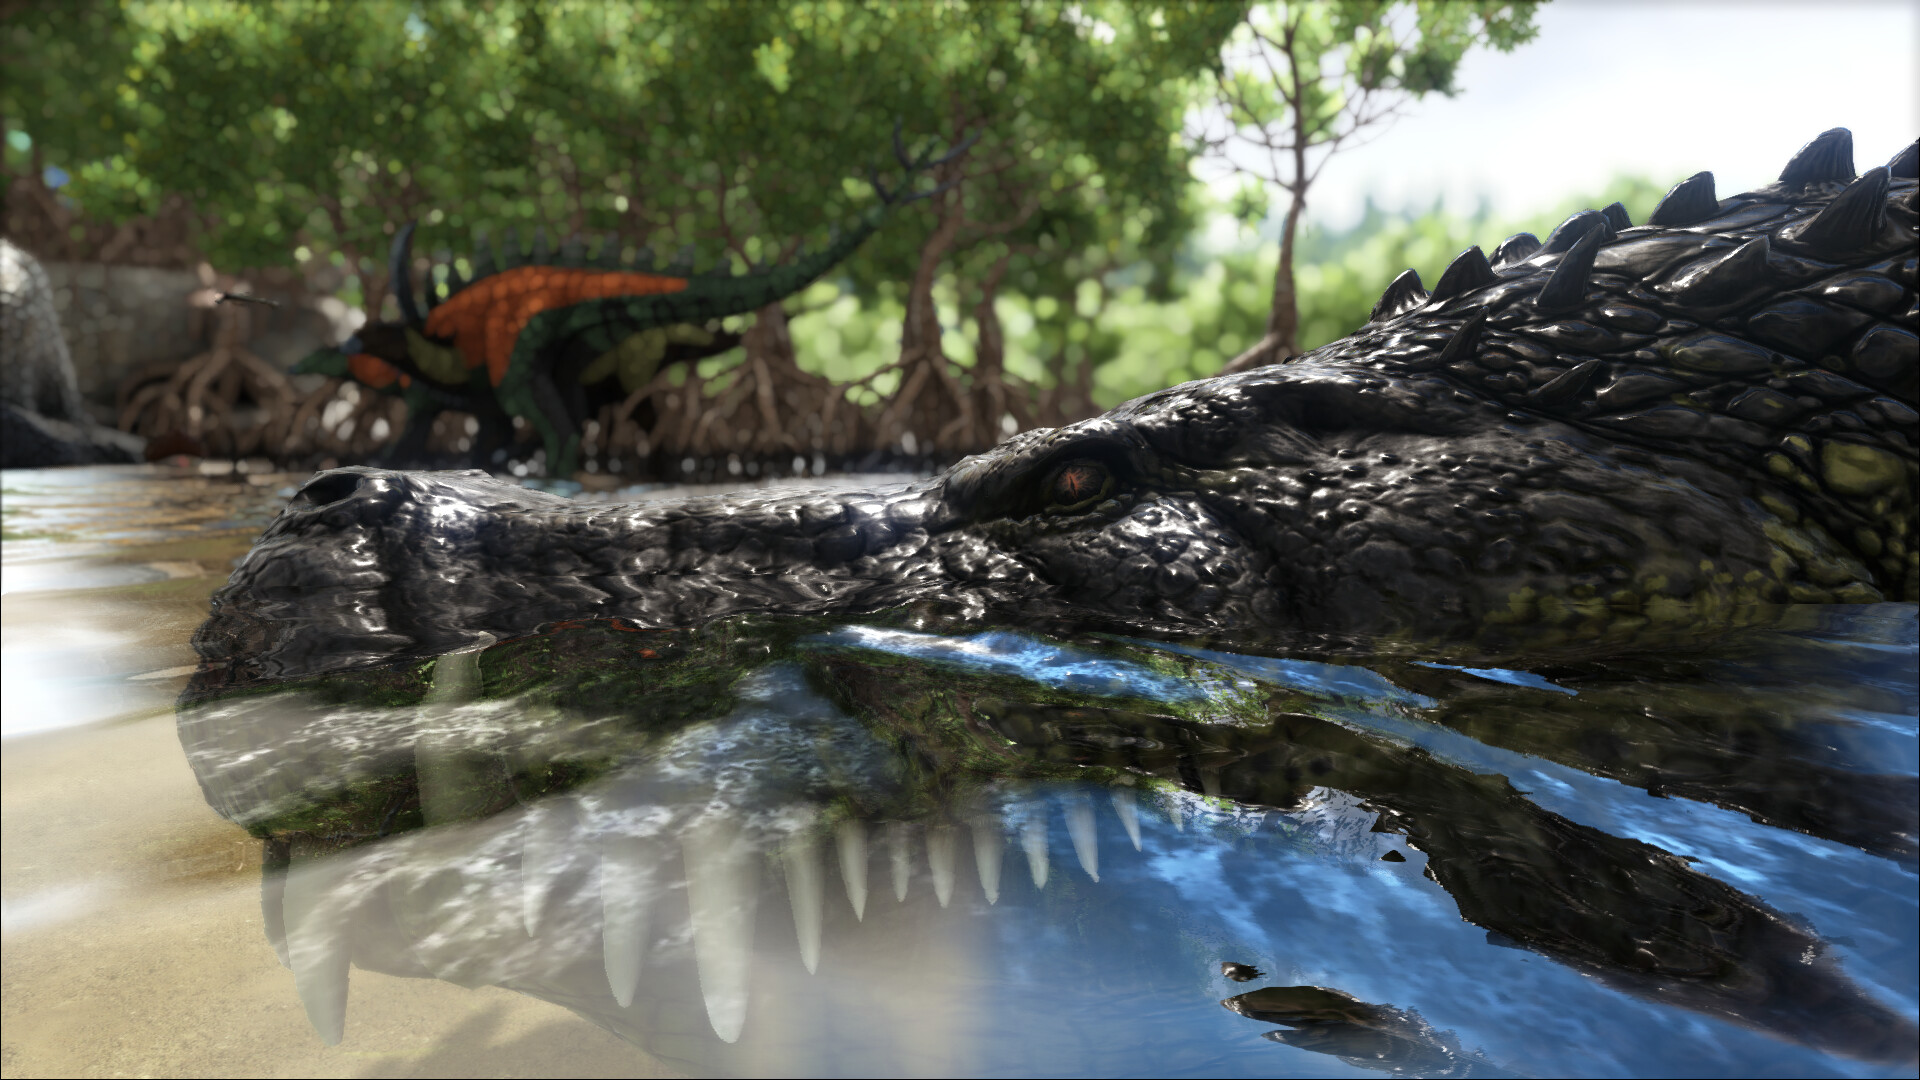 THE NEW & IMPROVED DEINOSUCHUS IS A FORCE OF NATURE! - ARK